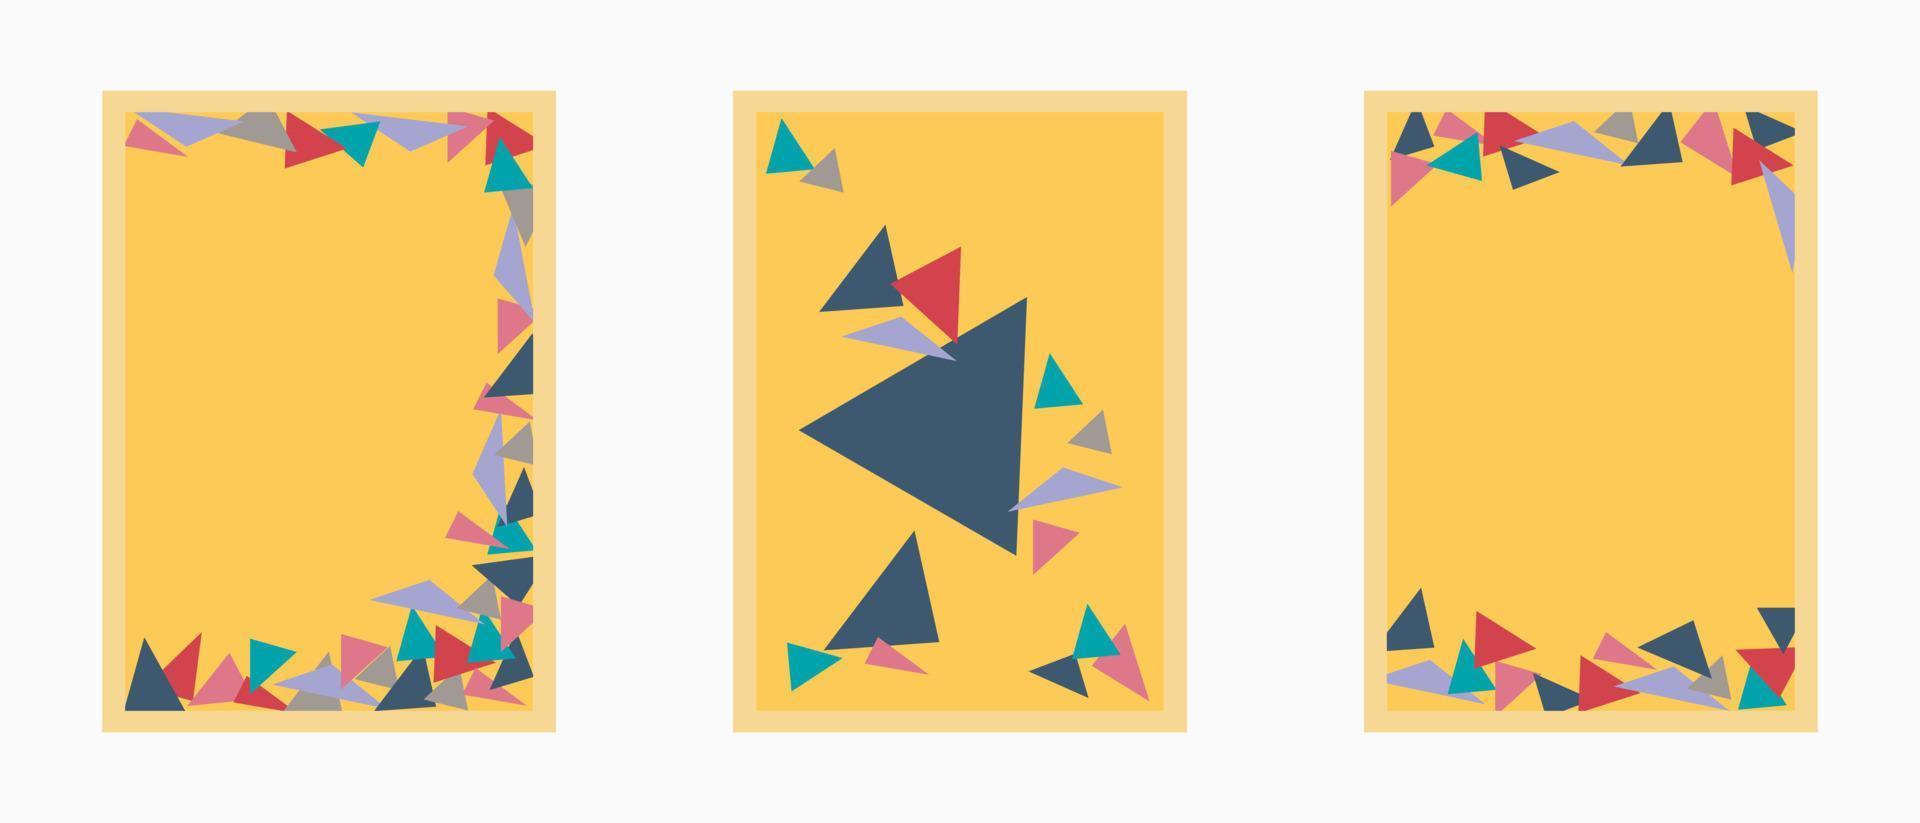 Nice colorful triangular background set with abstracts for posters, covers, cards, etc. vector